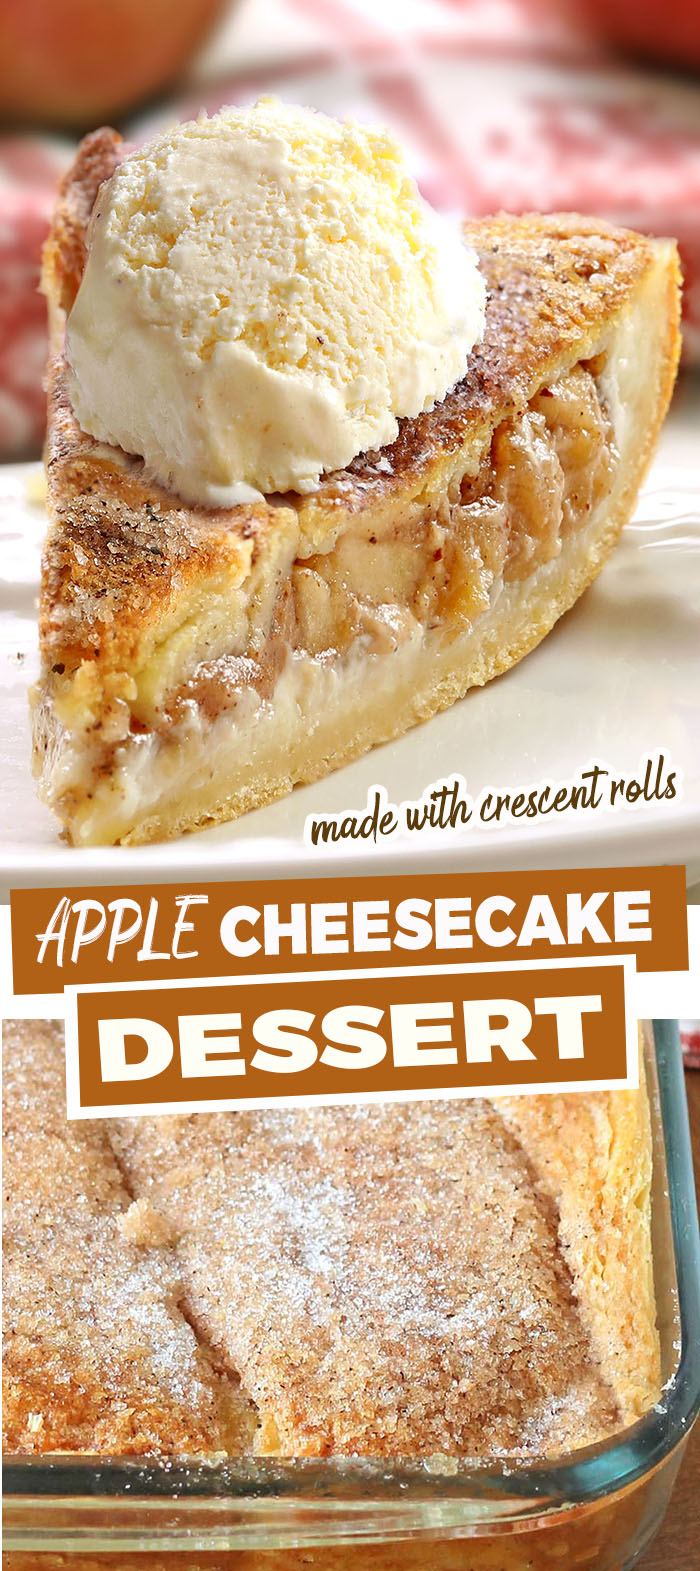 Apple Pie Cheesecake Dessert is quick and easy with minimal effort. It starts and ends with Crescent Rolls, with simplest apple pie and cheesecake filling.